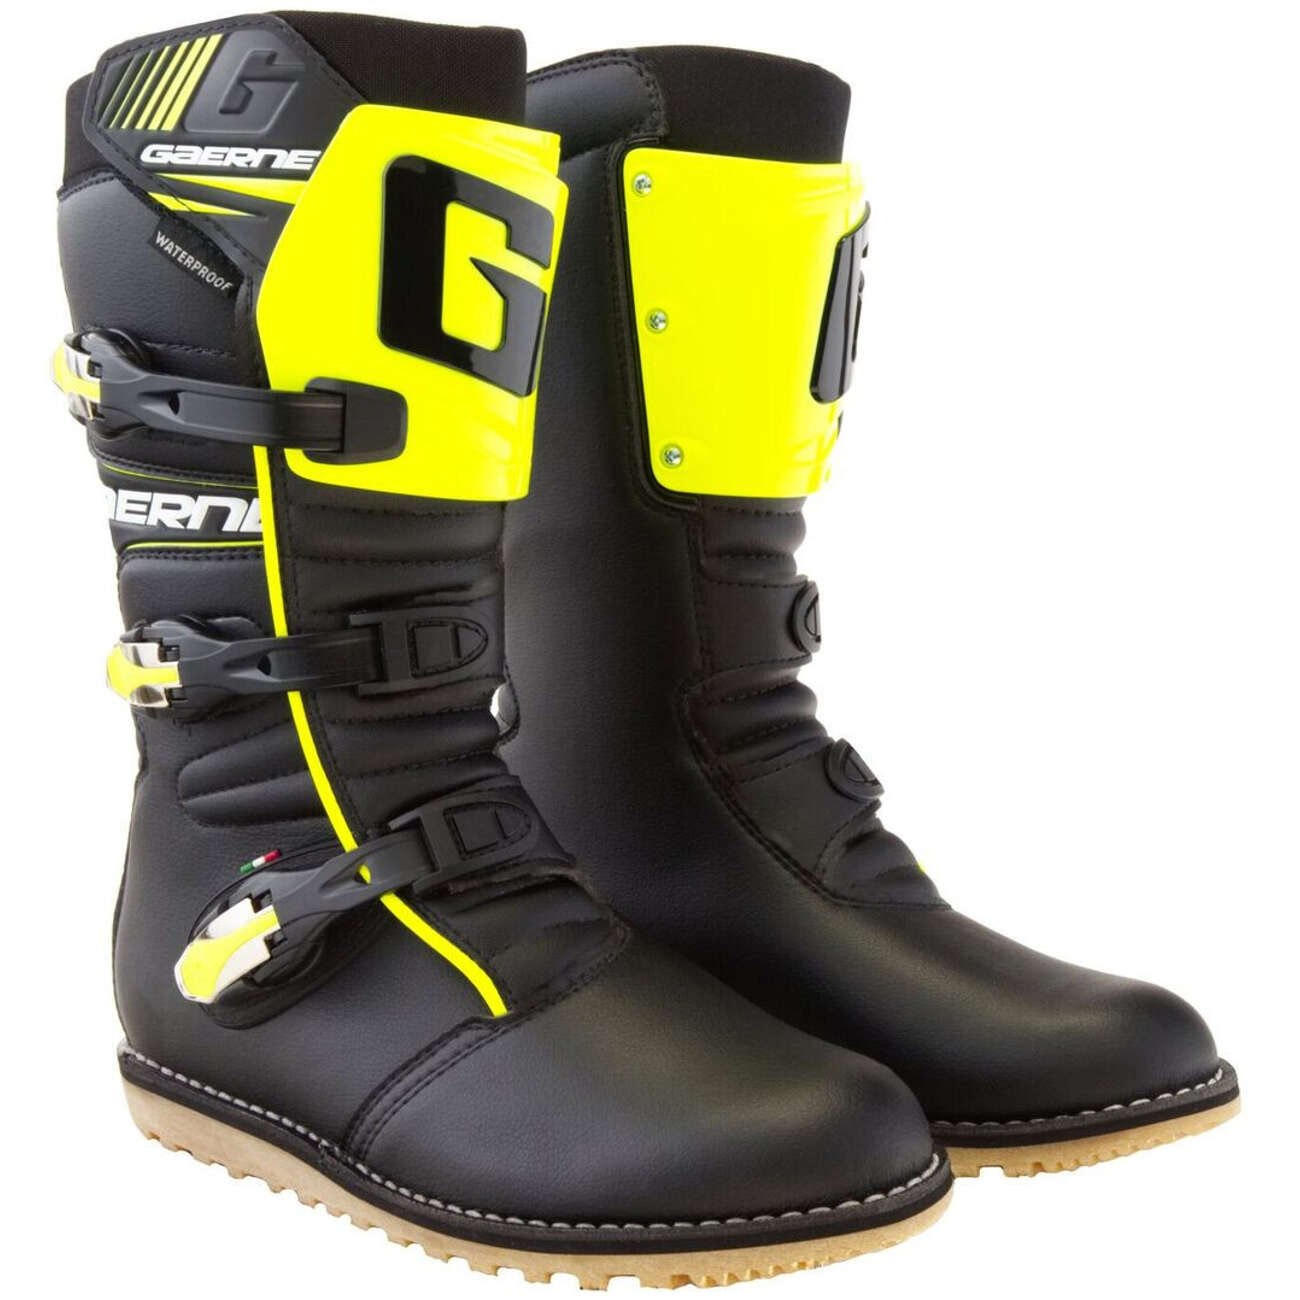 Gaerne Trial Boots Balance Classic Black/Neon